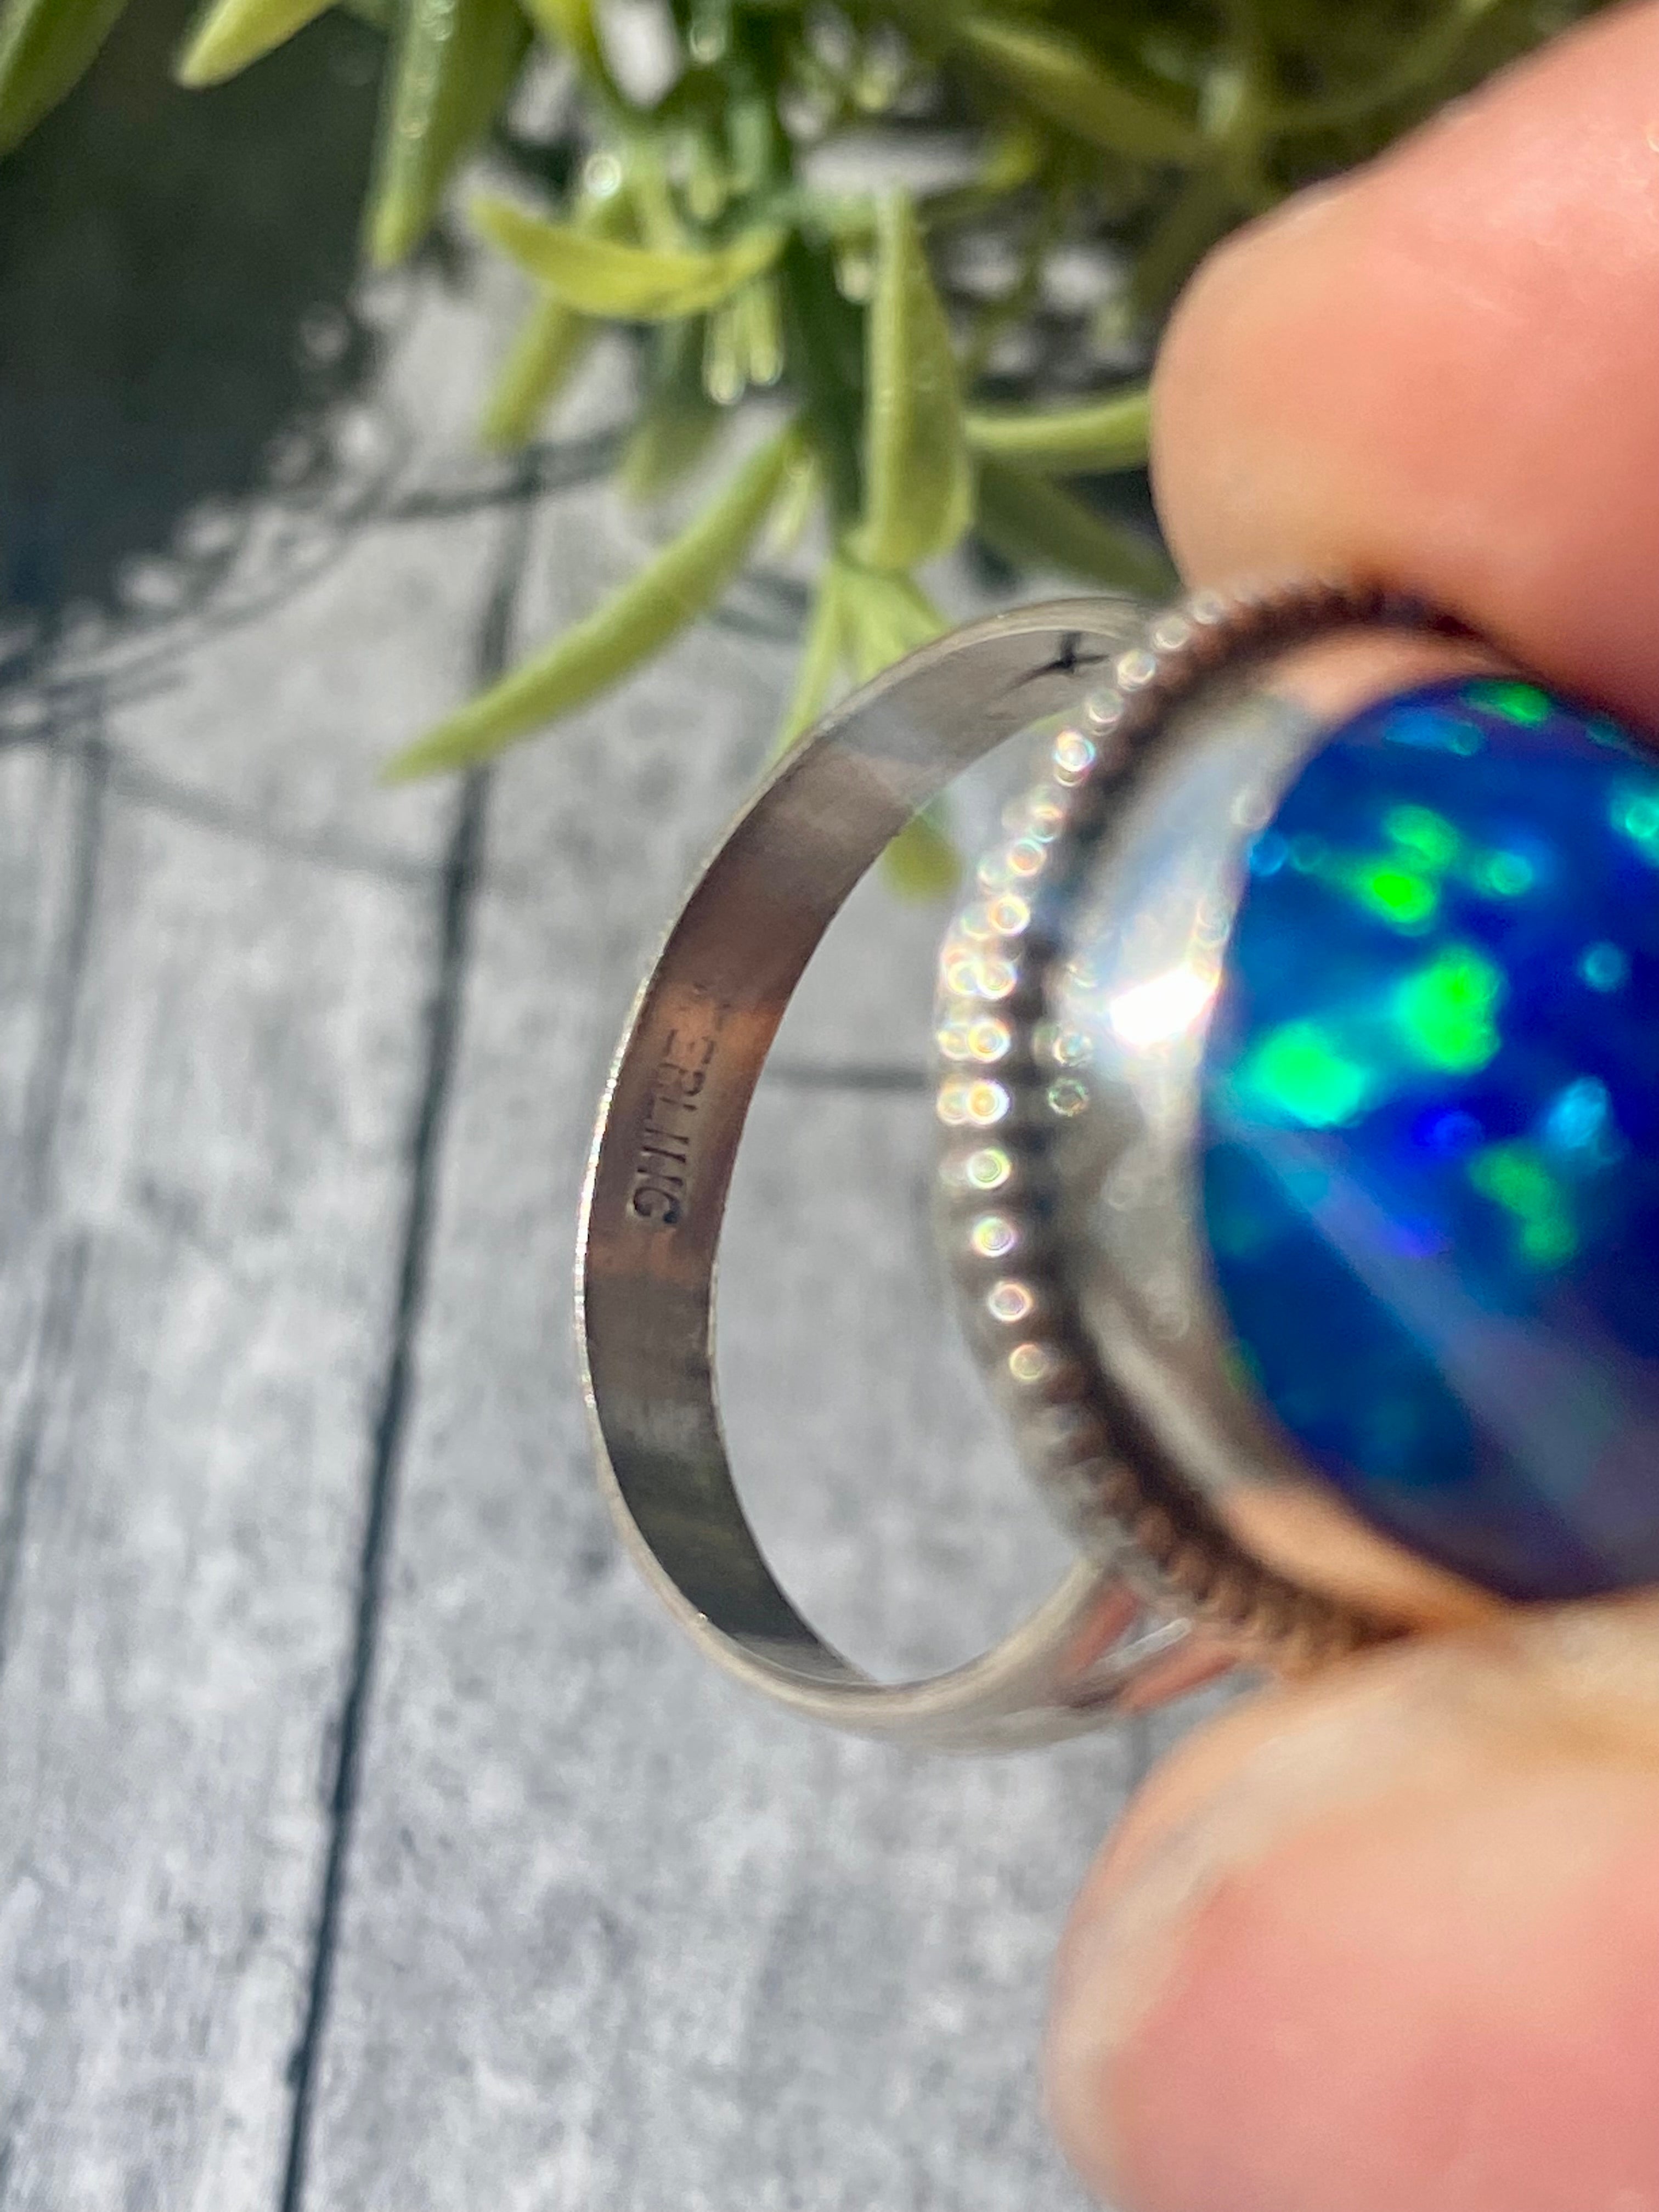 Navajo Made Opal & Sterling Silver Ring Size 7